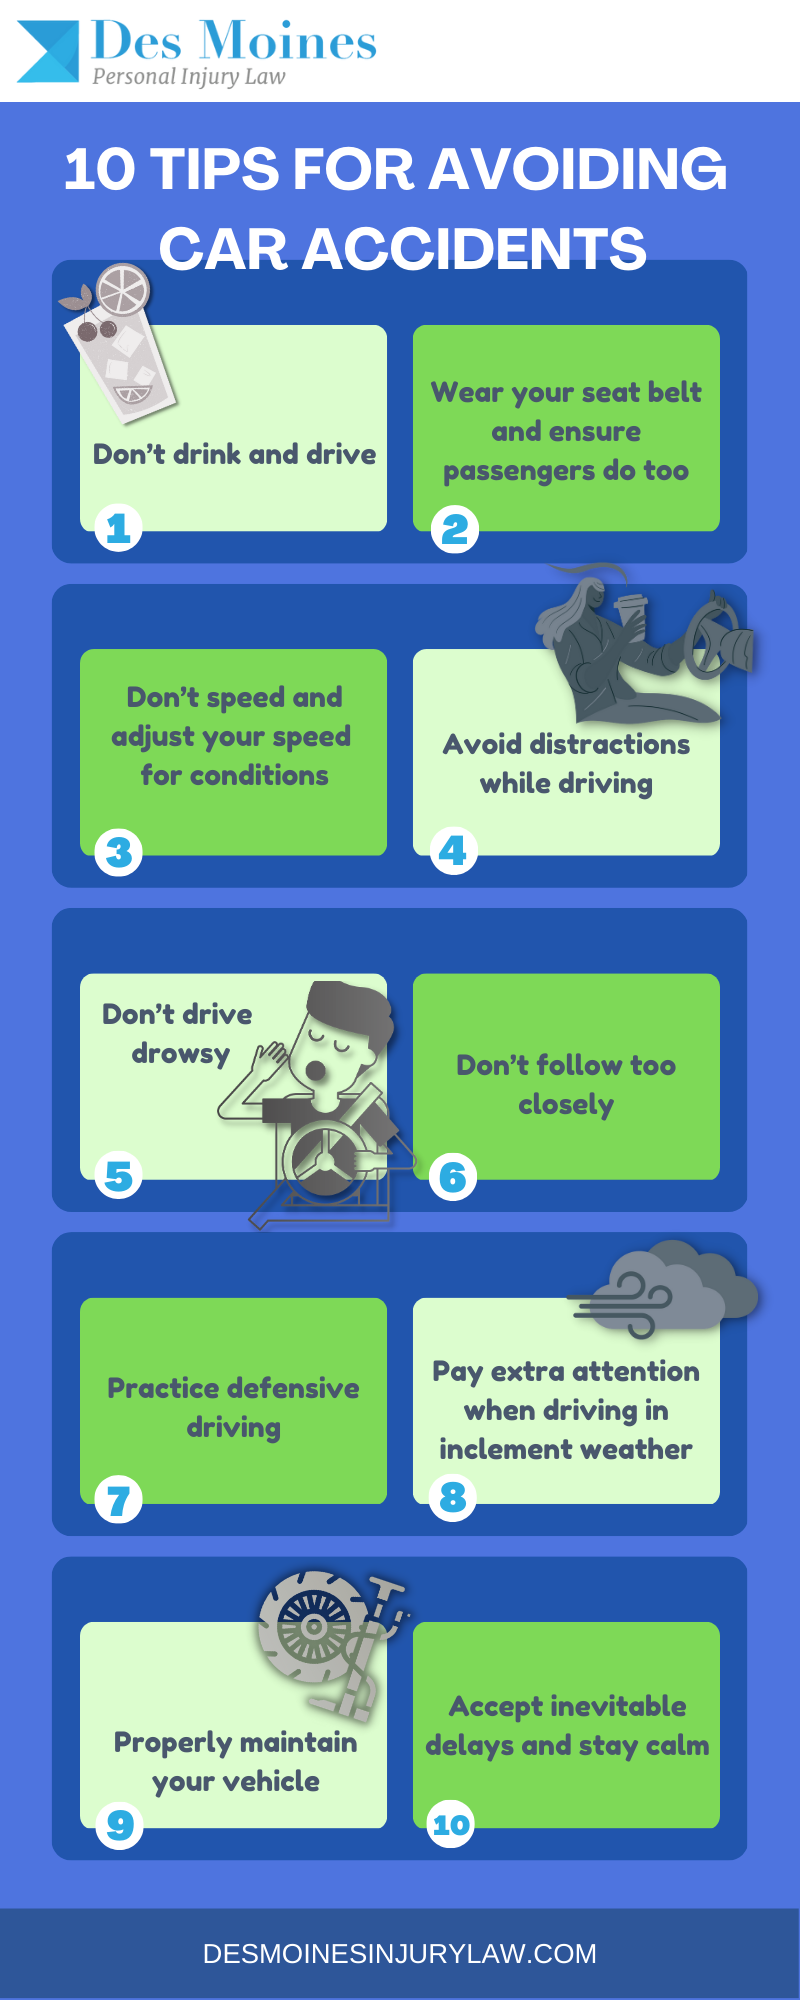 10 tips for avoiding car accidents infographic